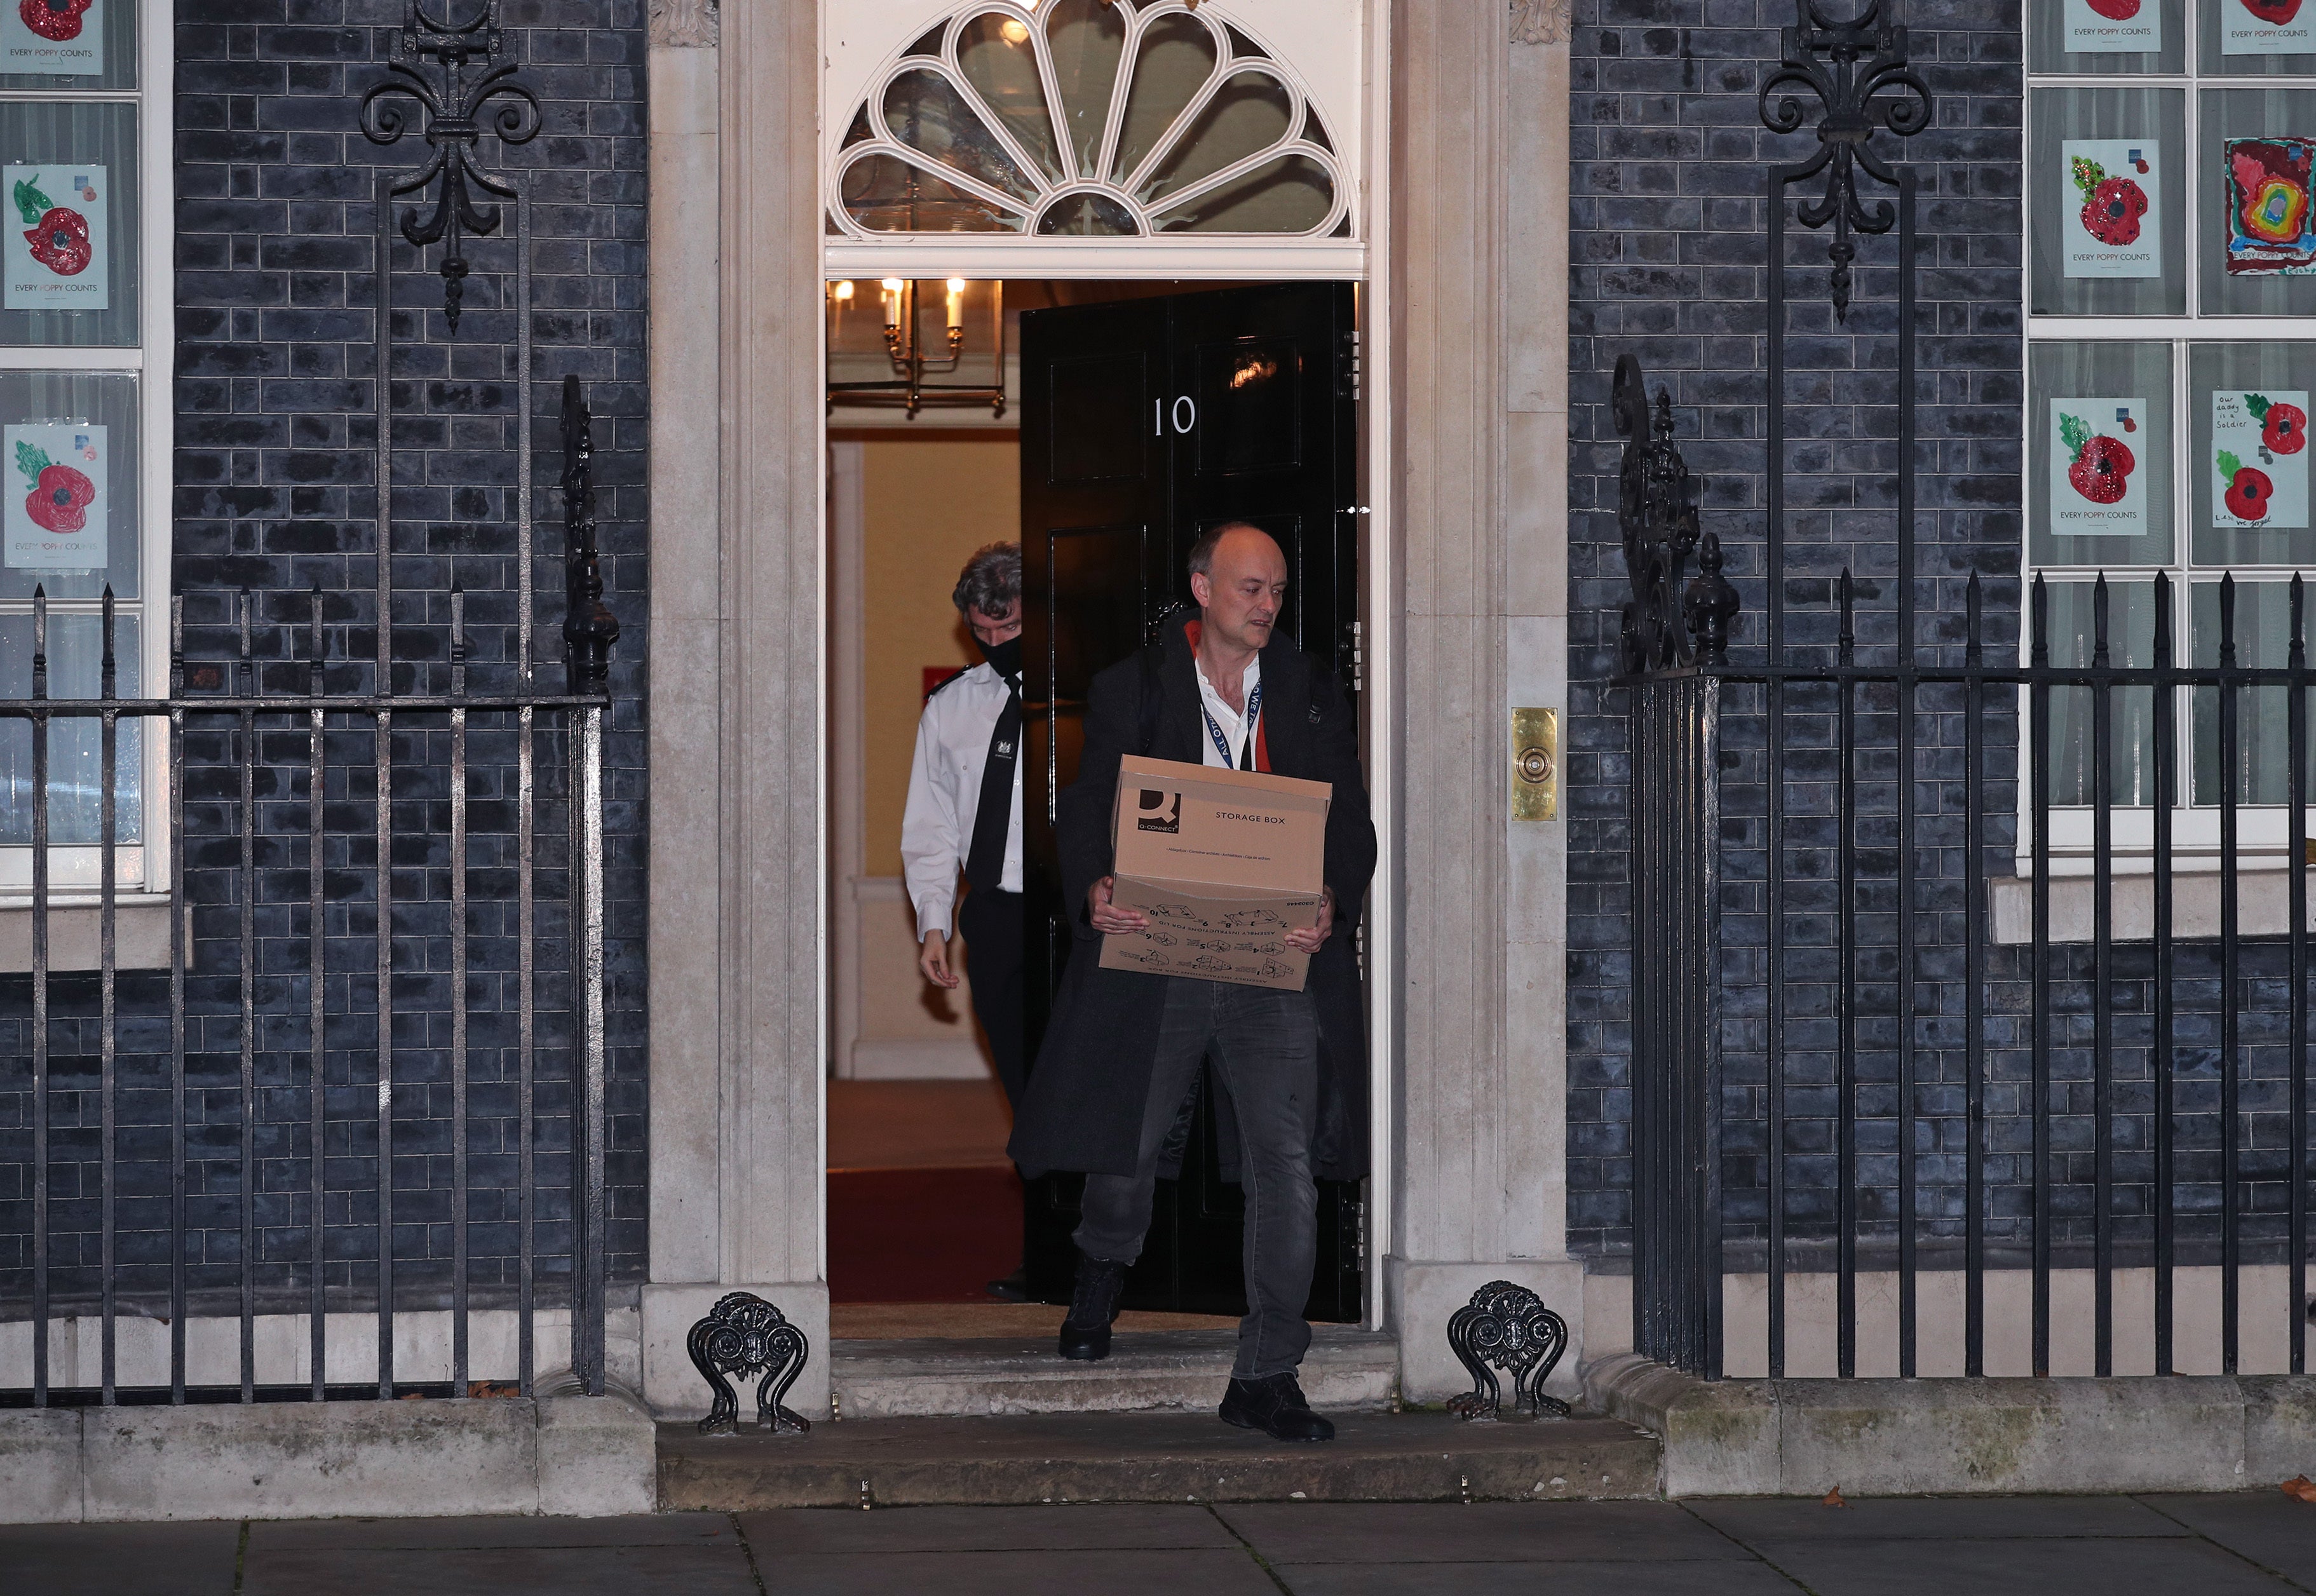 PM Boris Johnson’s former aide Dominic Cummings leaves 10 Downing Street after he breached Covid laws